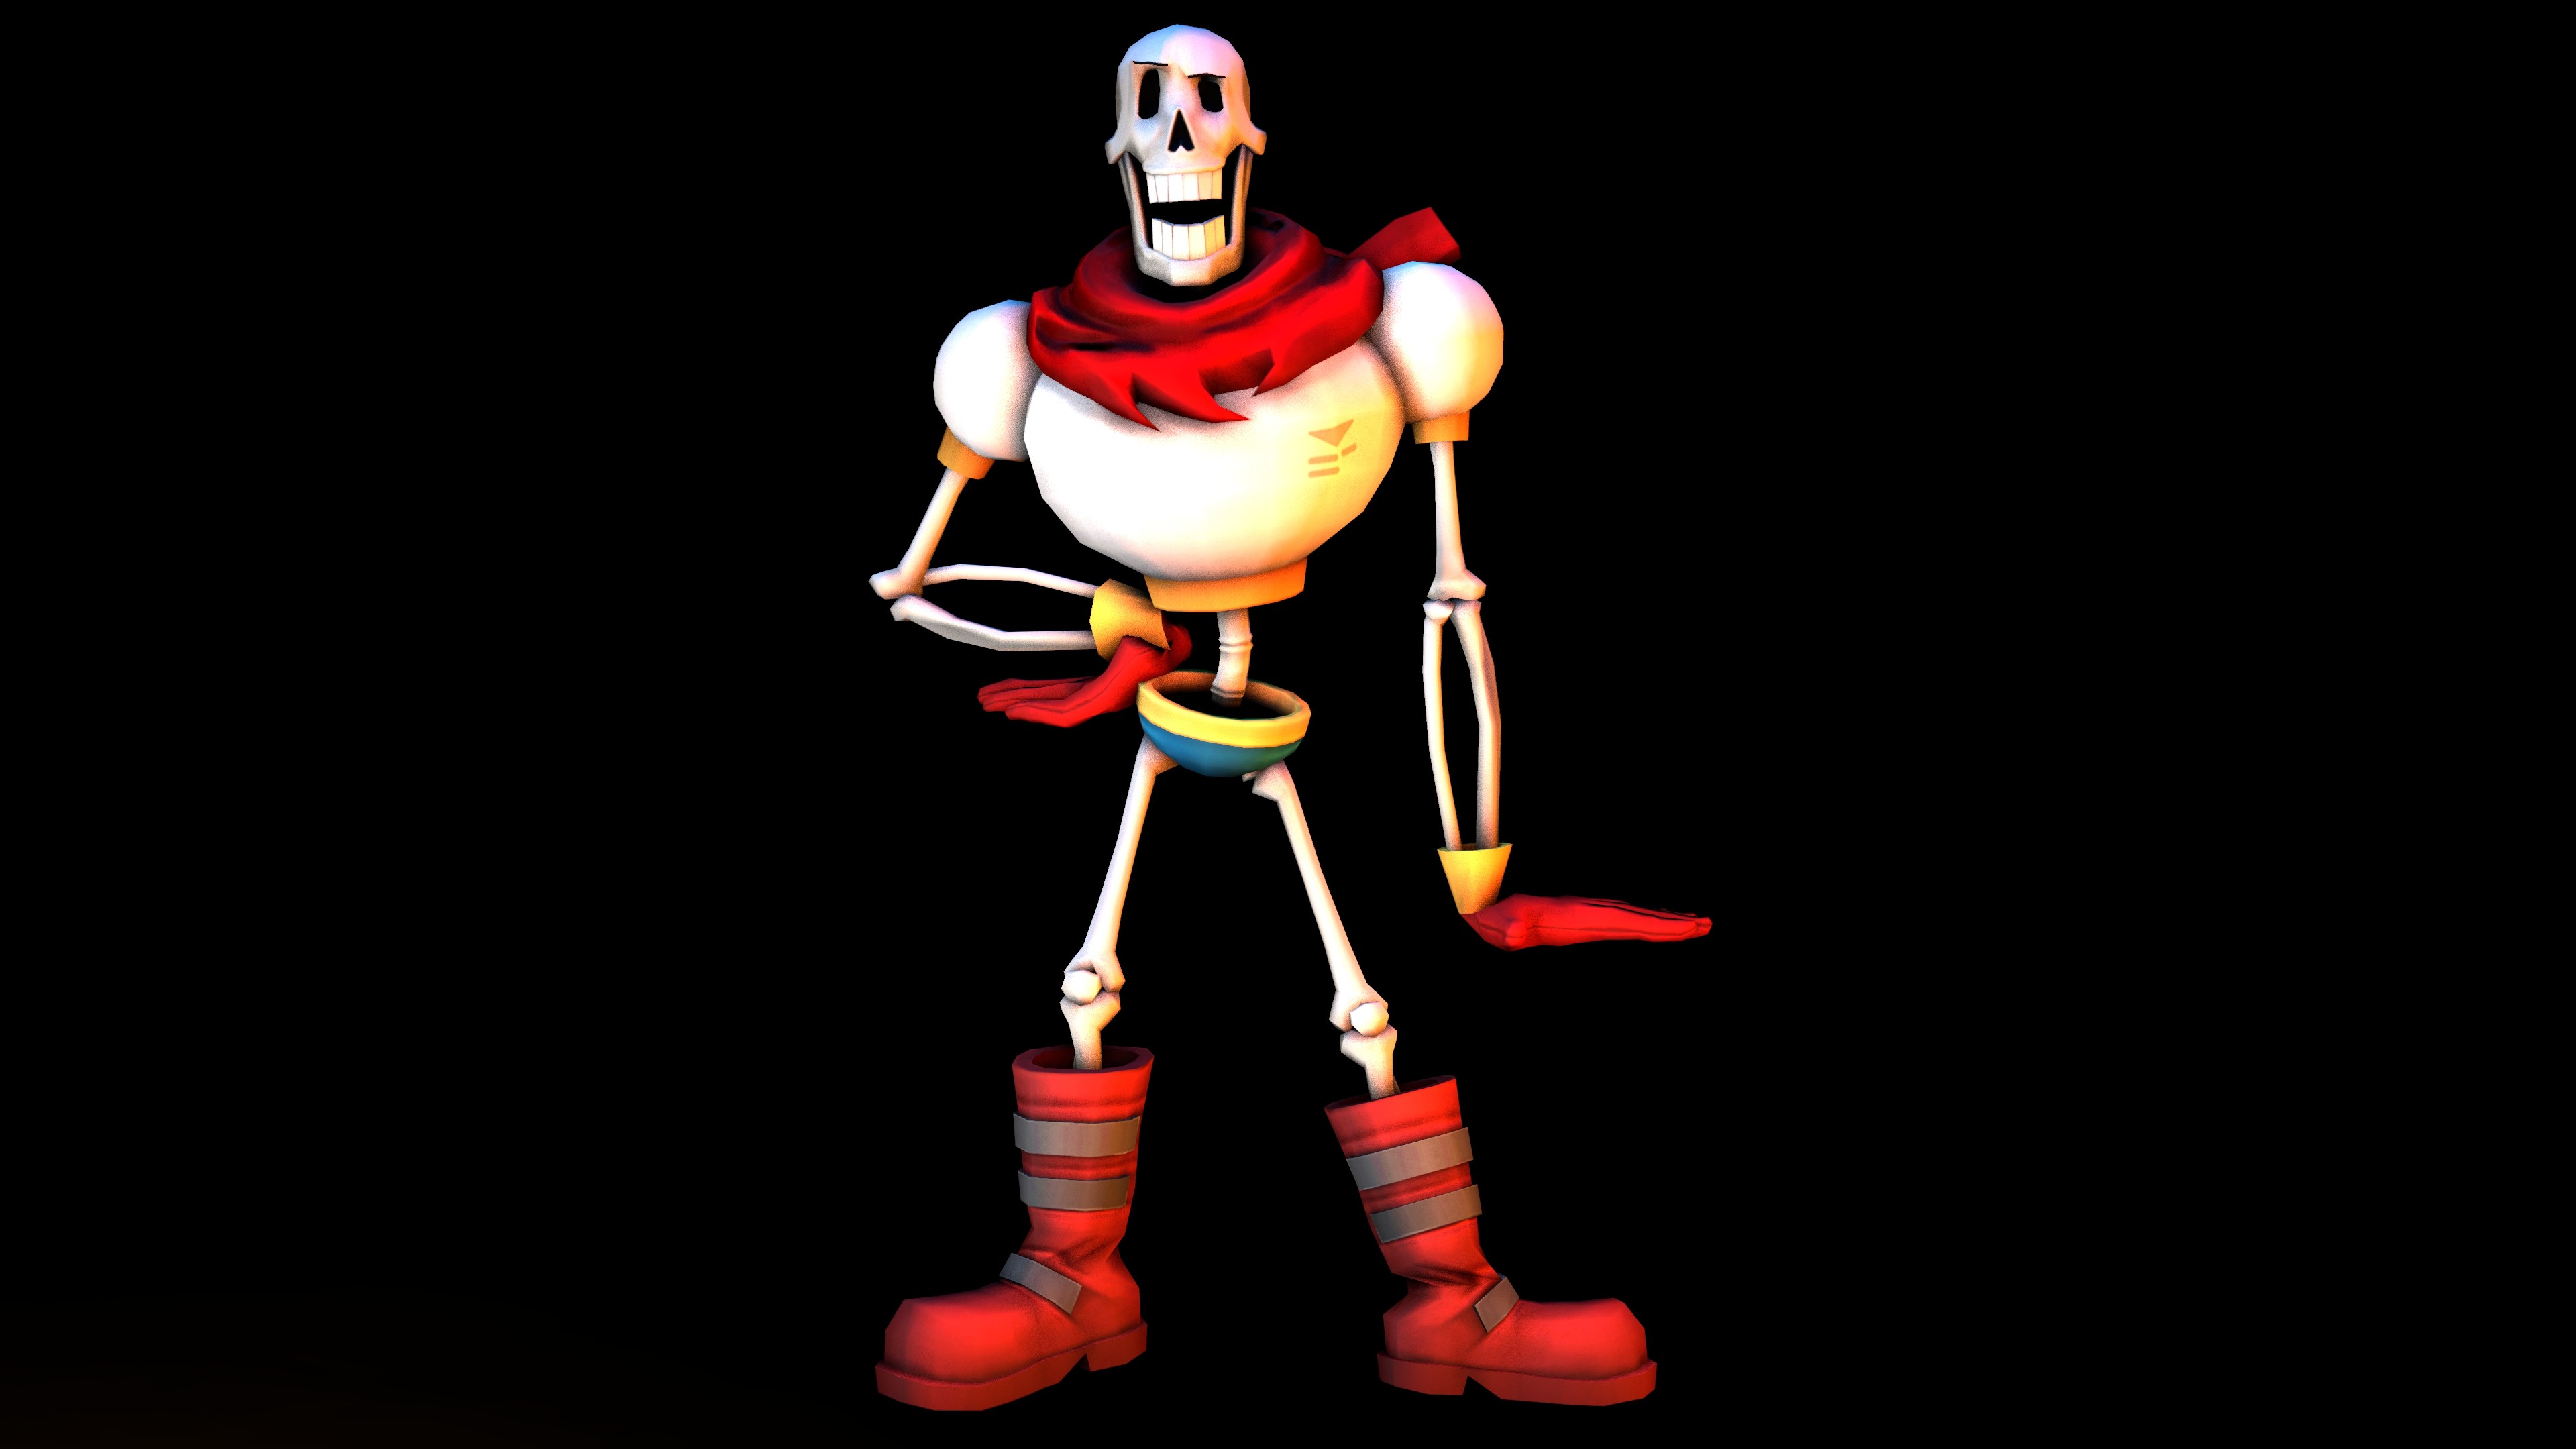 3840x2160 ... THE GREAT PAPYRUS [Undertale SFM] by Z0mbie1337